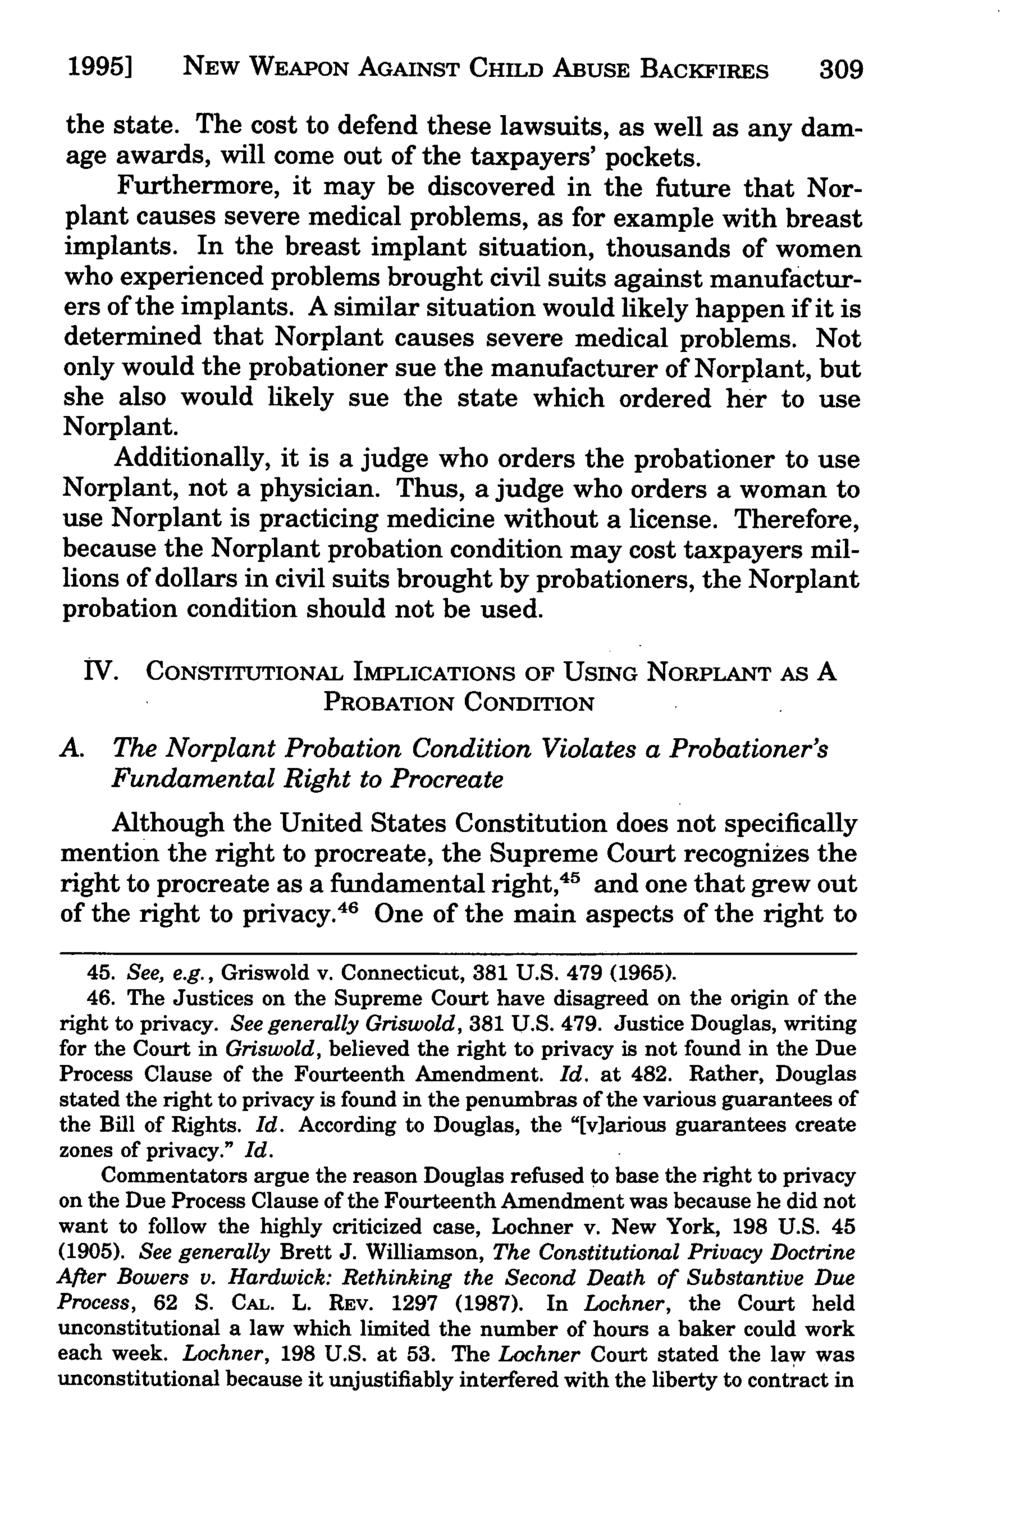 1995] NEW Jebson: WEAPON Conditioning AGAINST a Woman's Probation CHILD on ABUSE Her Using BACKFIRES Norplant: New Weapo 309 the state.